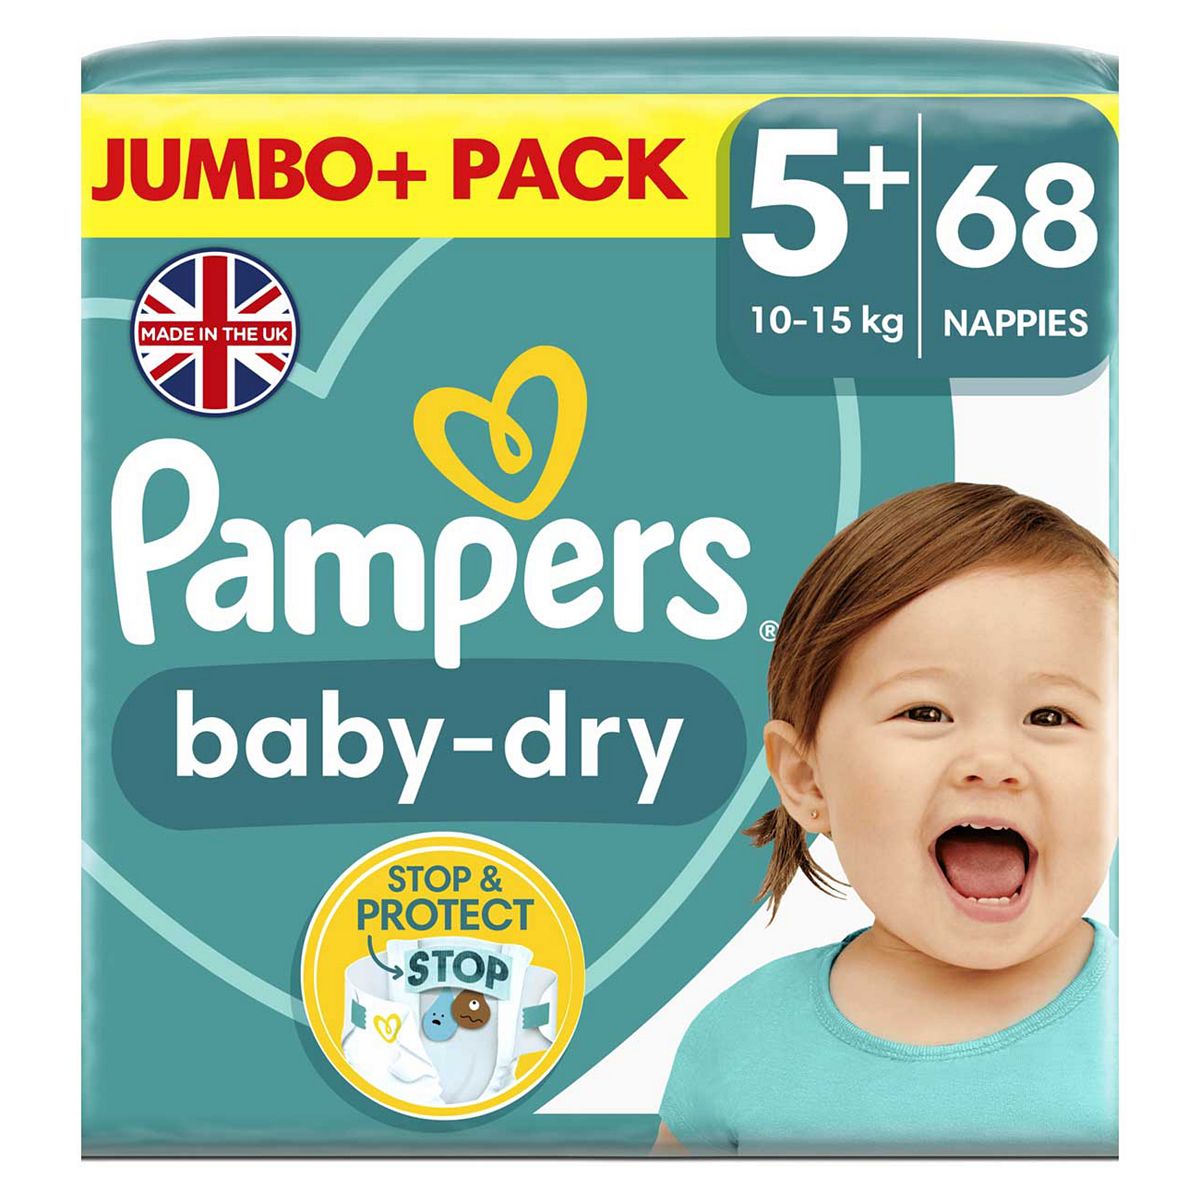 Pampers Baby-Dry Size 5+, 68 Nappies, 12kg-17kg, Jumbo+ Pack GOODS Boots   